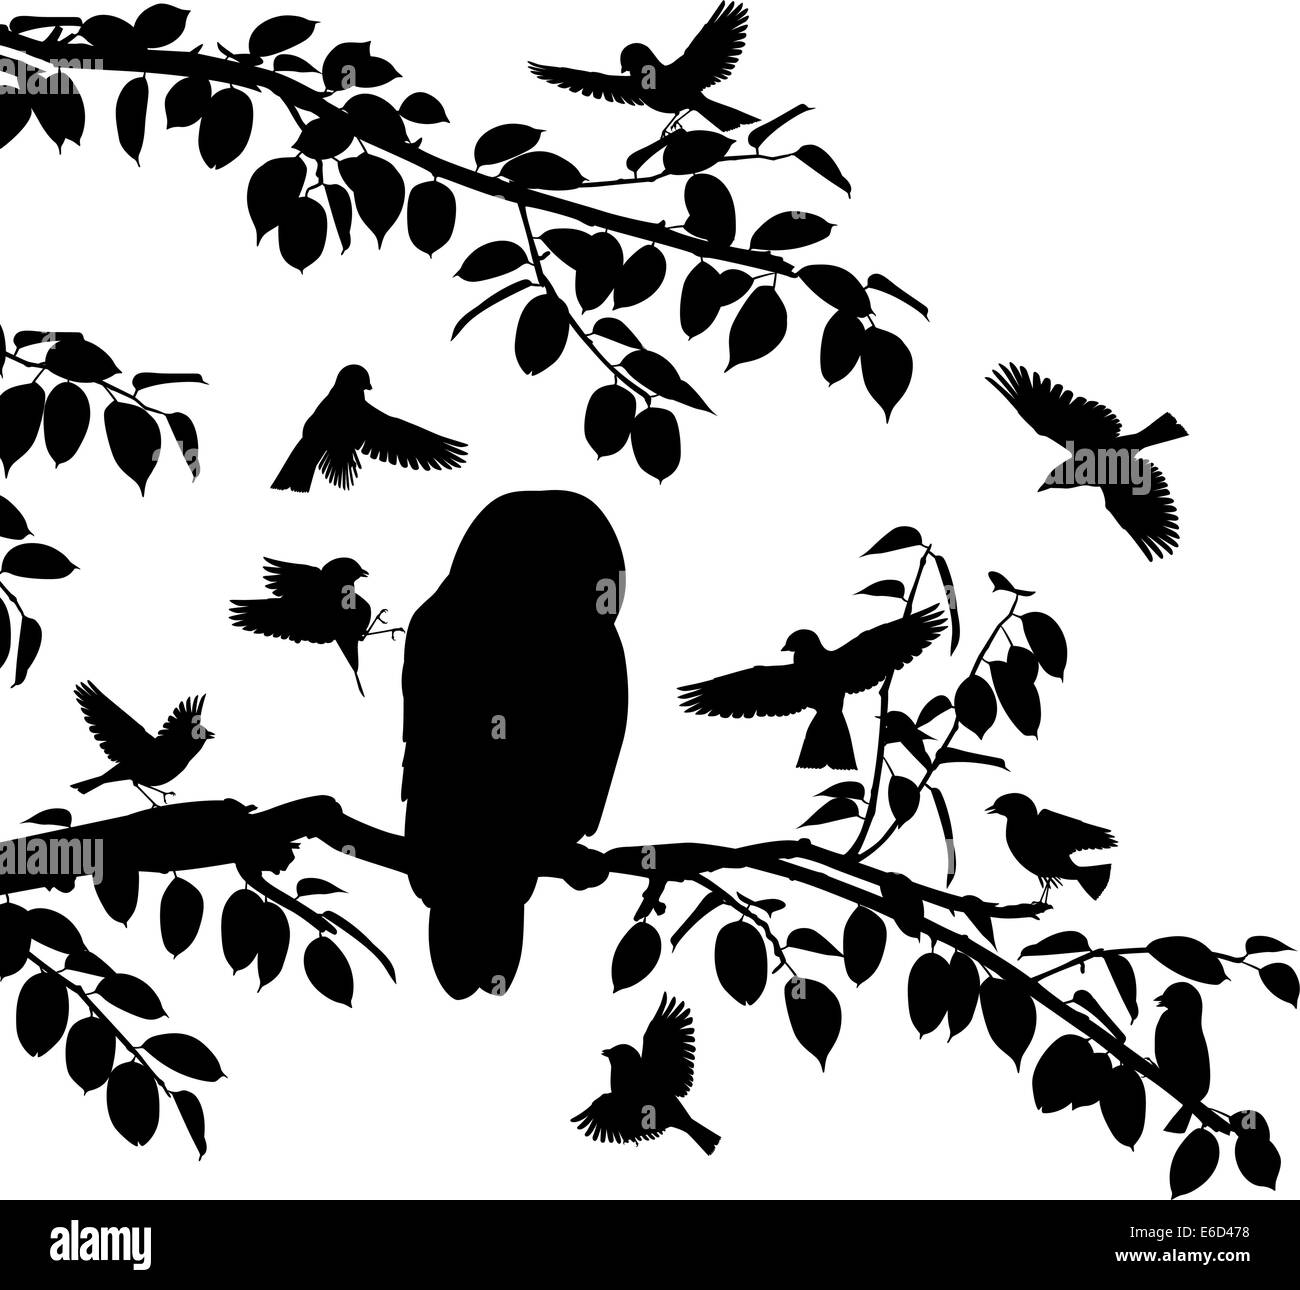 Editable vector silhouettes of songbirds mobbing an owl with all birds as separate objects Stock Vector